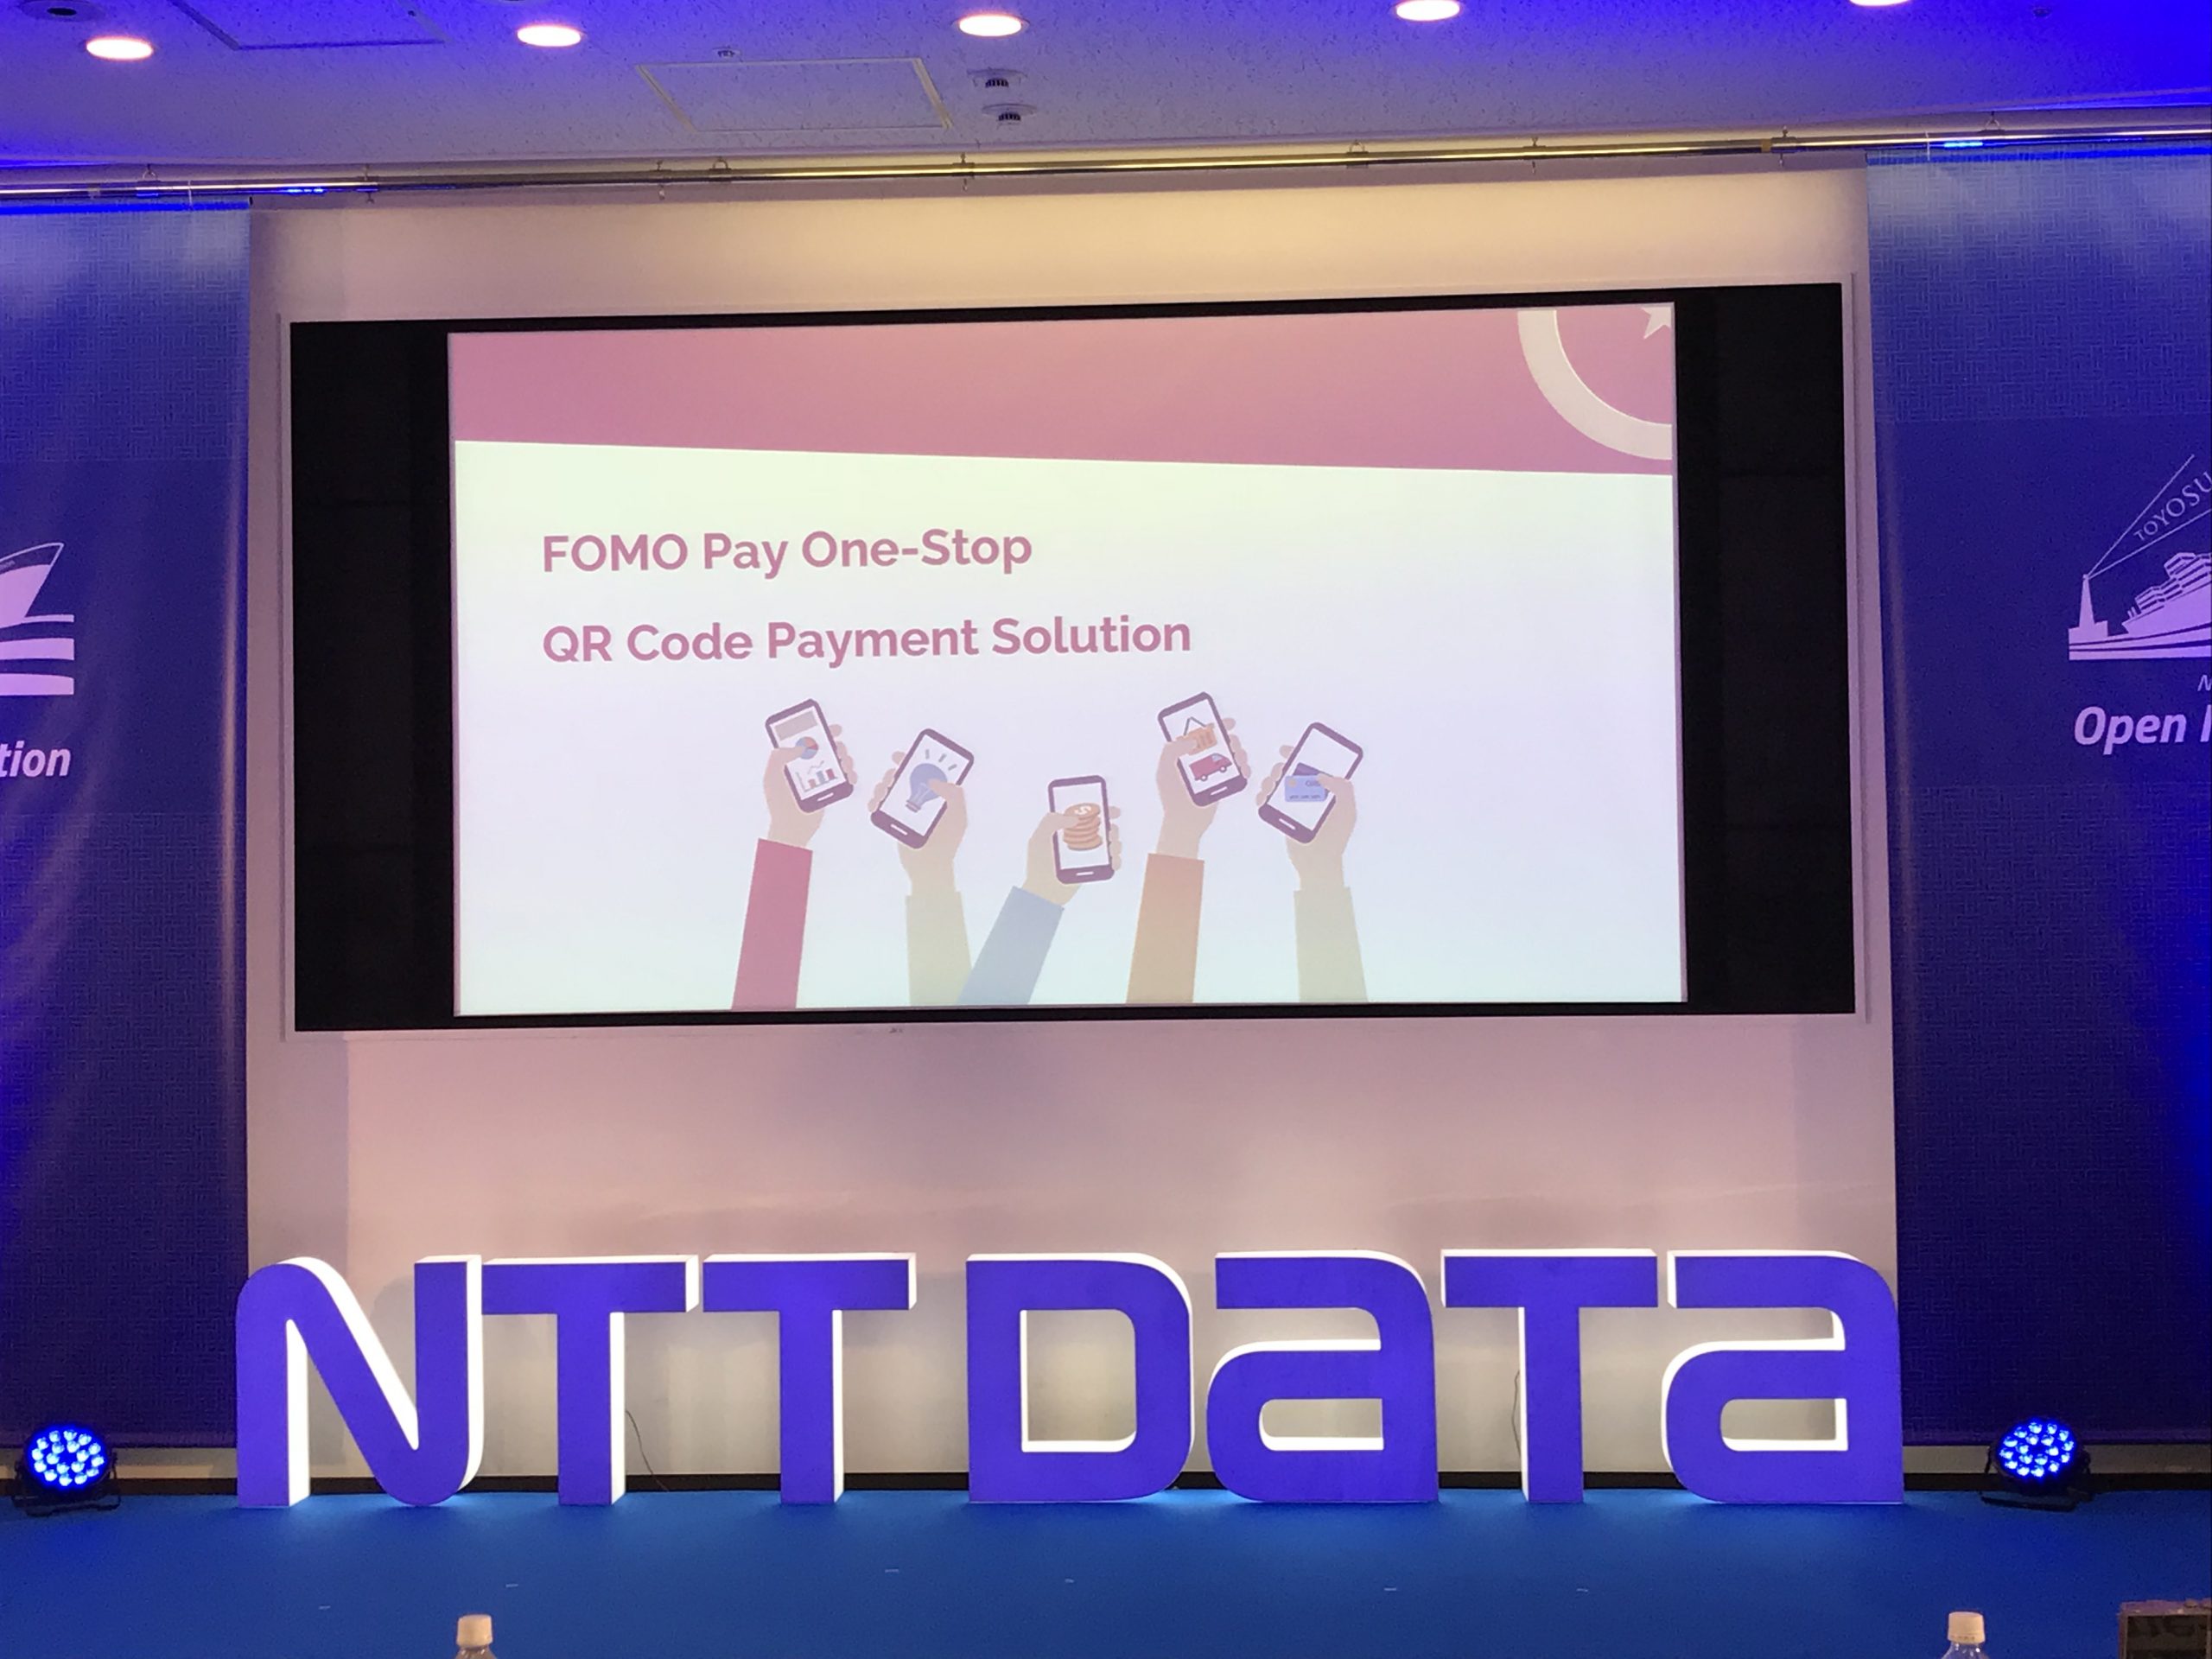 FOMO Pay bags Grand Finale Judge award at NTT DATA’s Open Innovation Contest 7.0